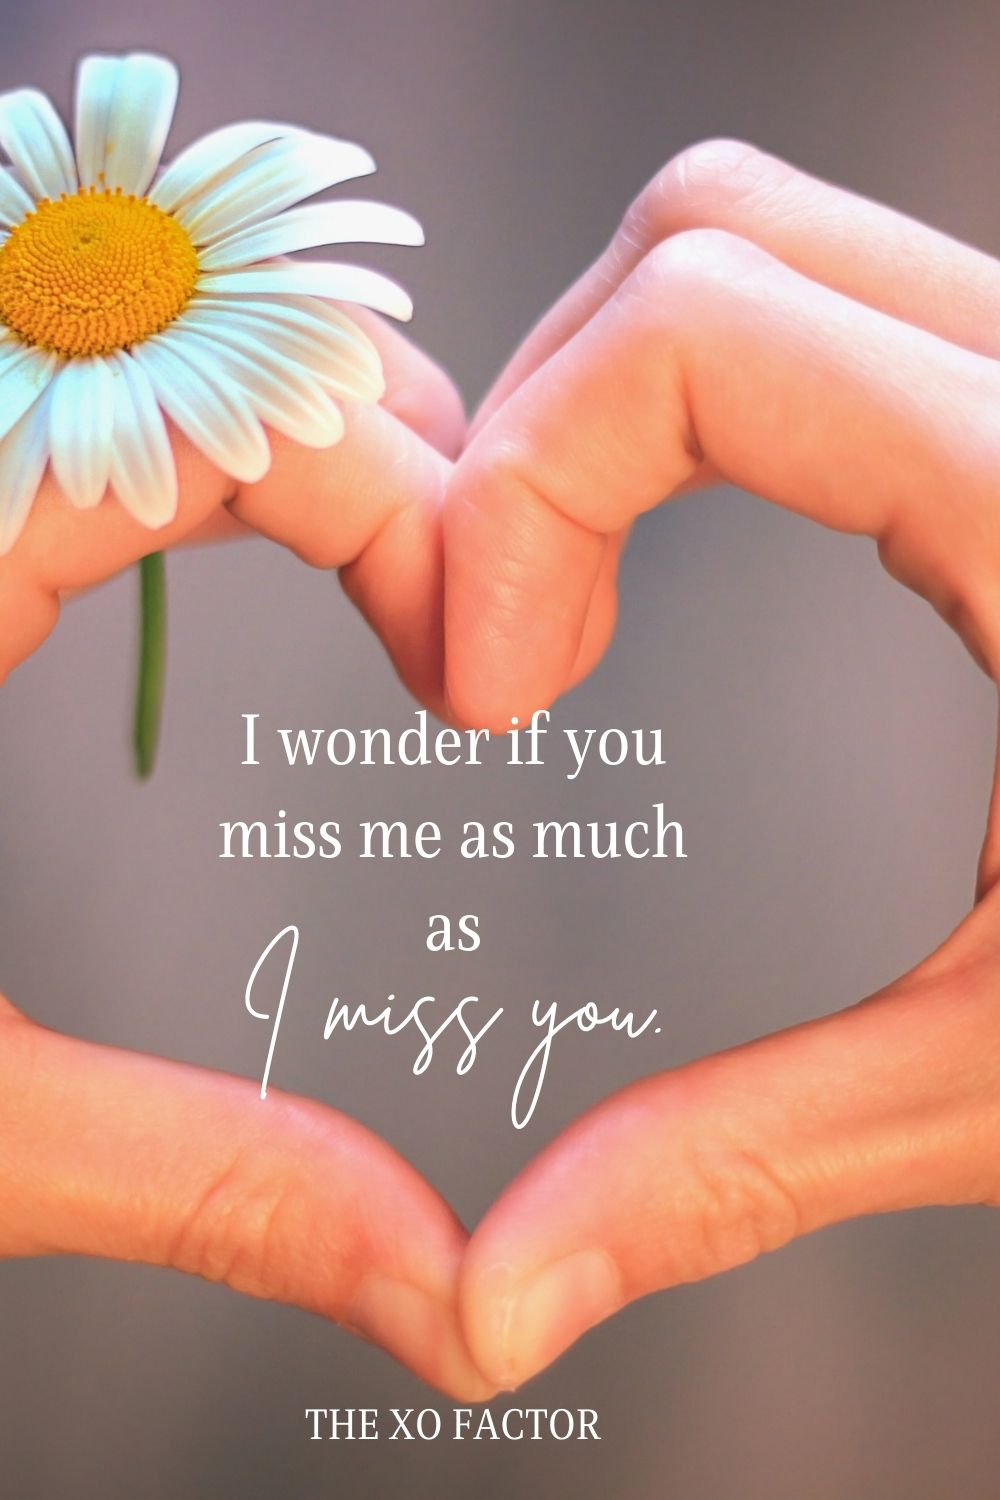 I wonder if you miss me as much as I miss you.